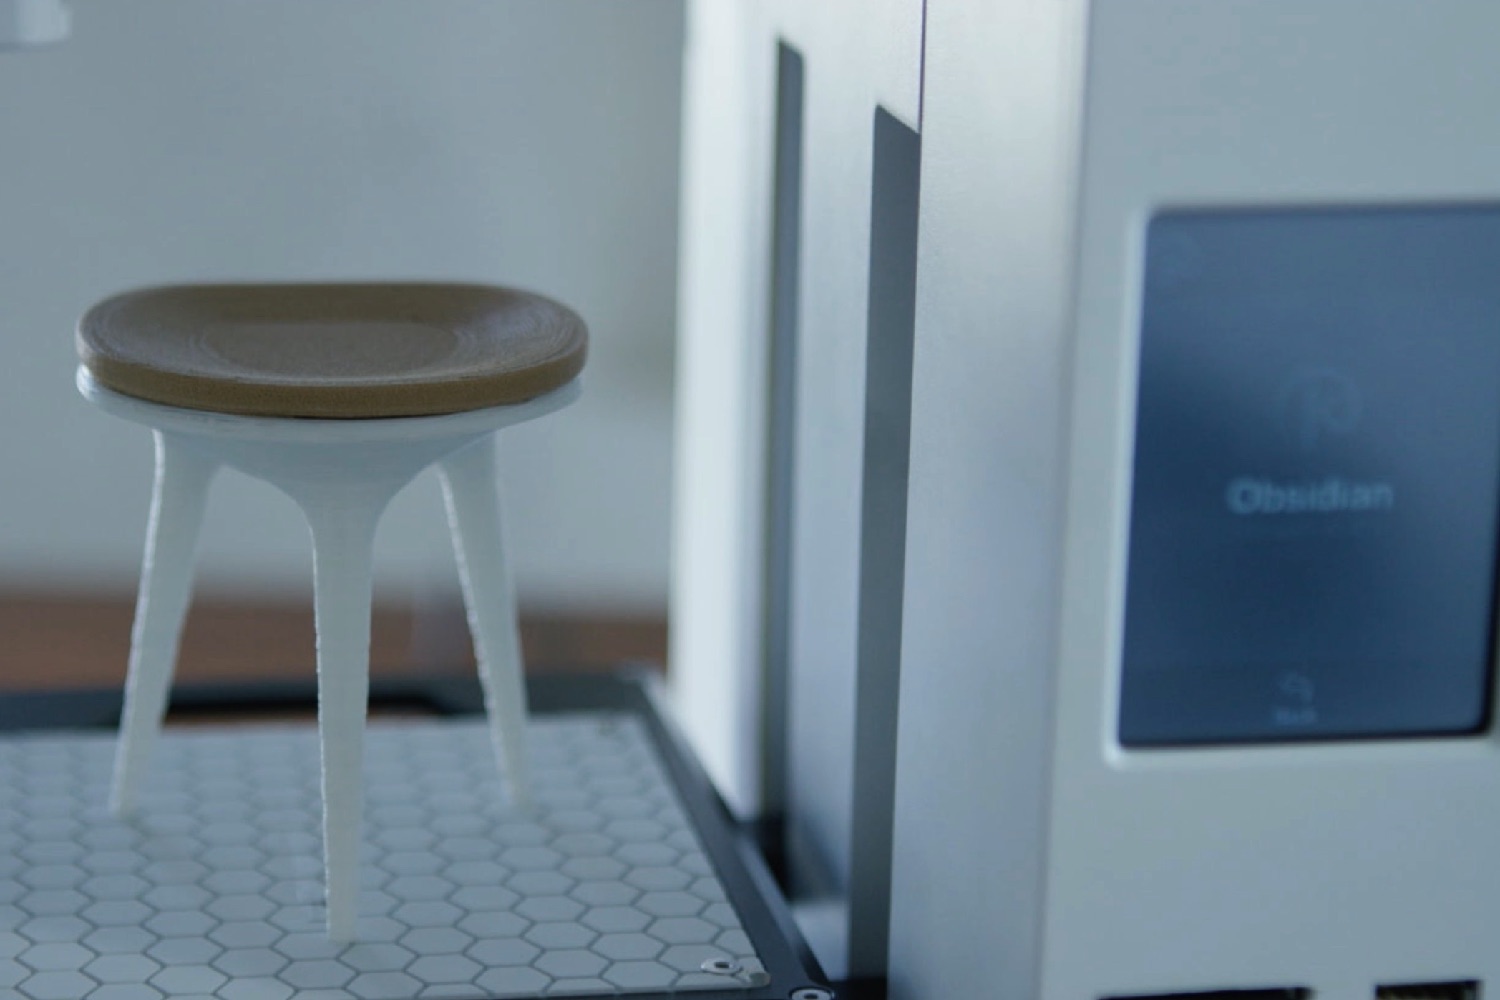 $99 3D Hopes To Succeed Where Its Kickstarter Have Failed | Trends